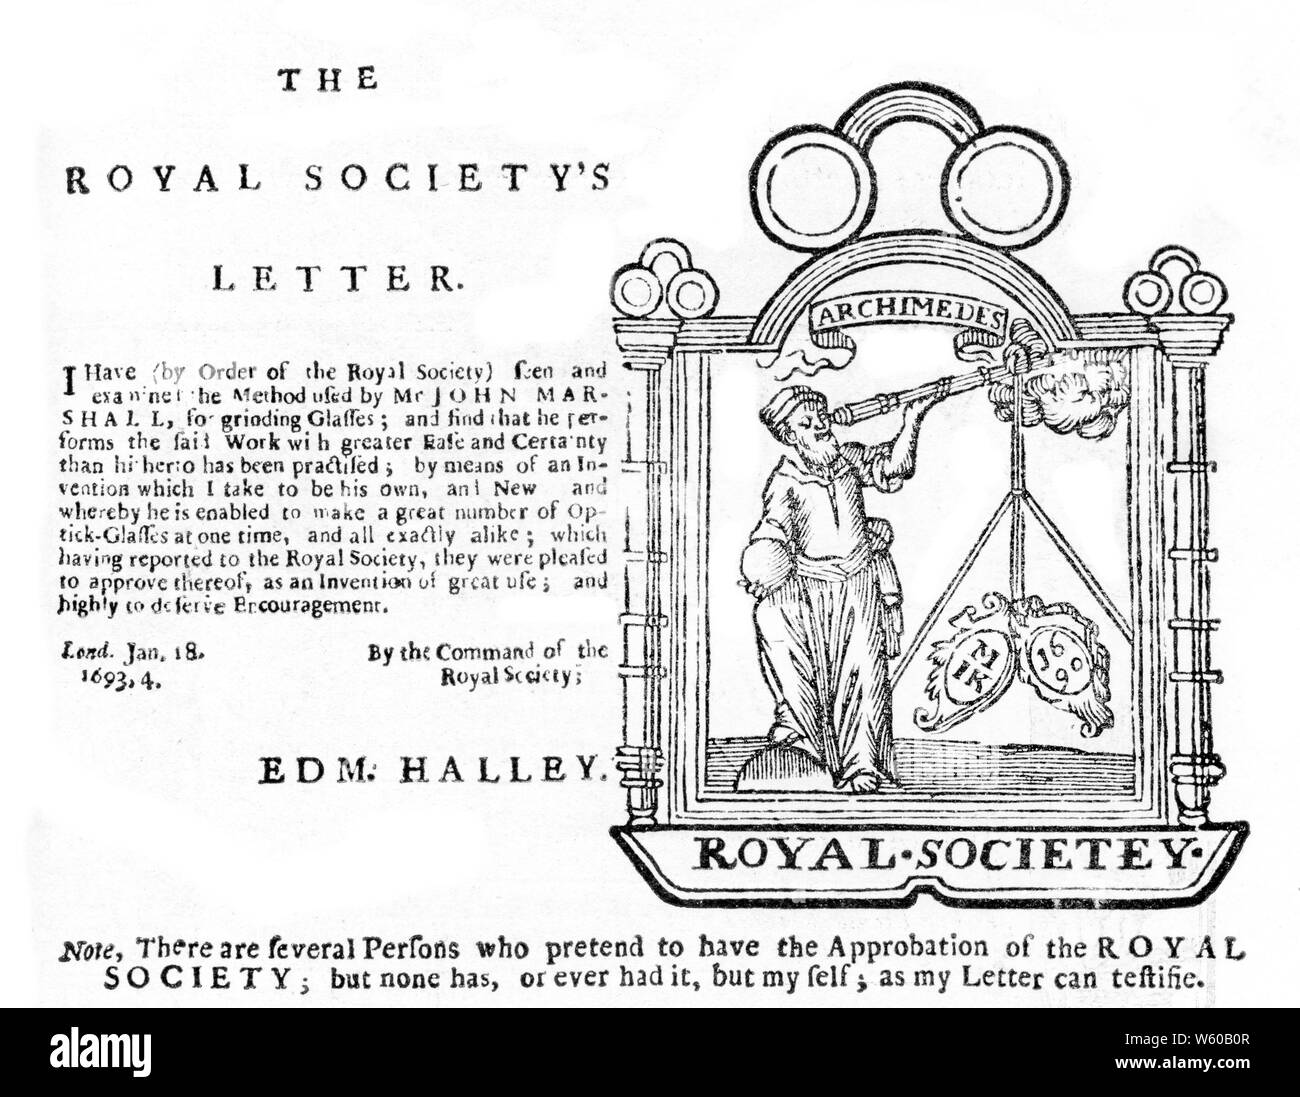 Advertisement of John Marshall, Optician, 1694. With letter of accreditation by the Royal Society signed by Edmond Halley (1656-1742). During the 17th century spectacles became more popular, though they were still mainly for the elderly and could carry negative connotations. Stock Photo